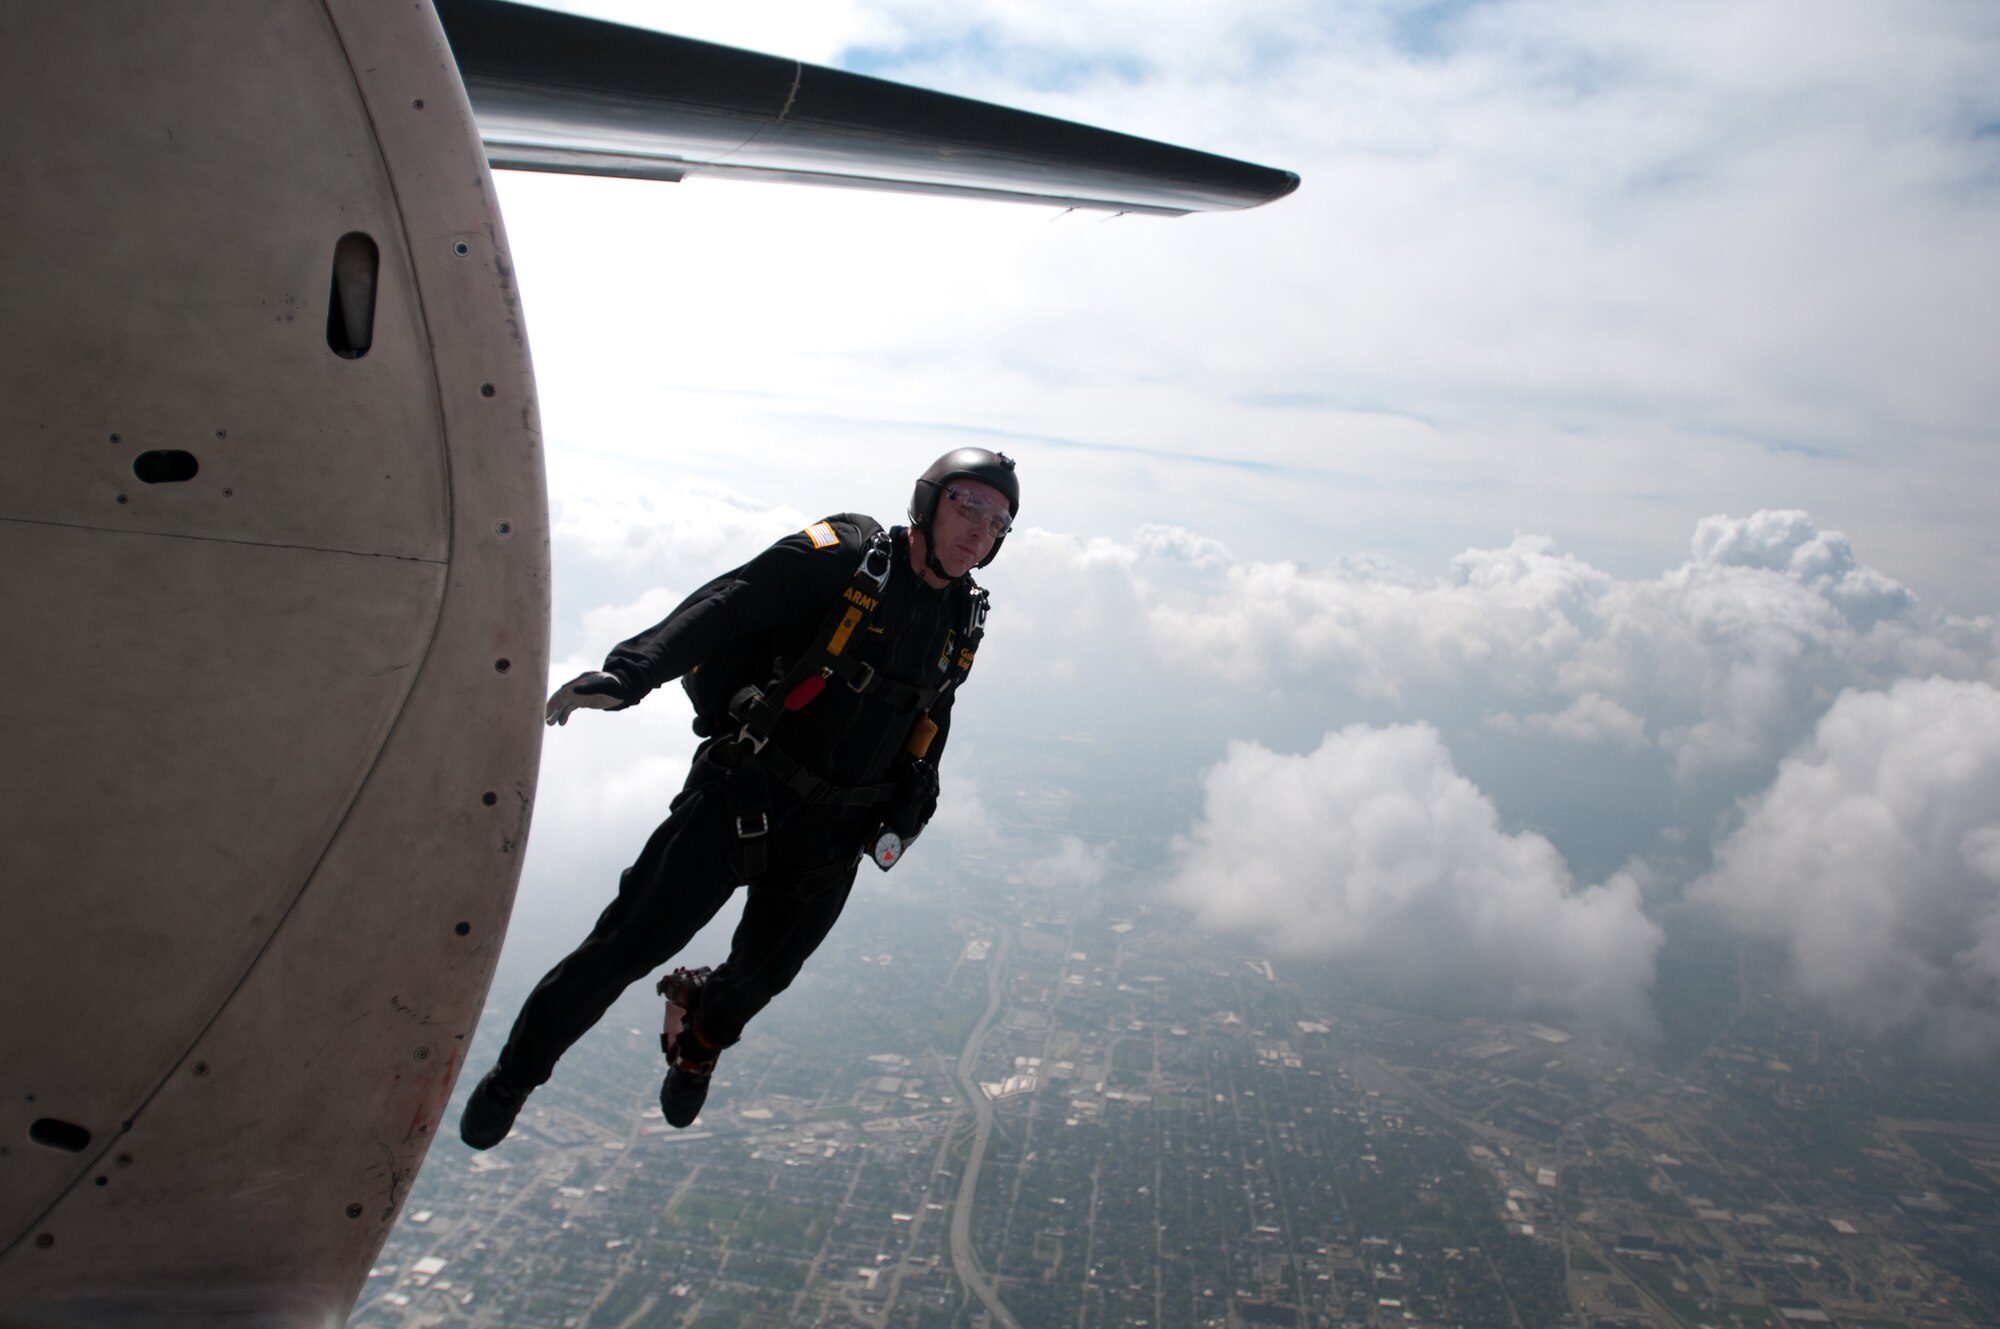 Sgt. 1st Class Corey Hood, a member of the U.S. Army Parachute Team, also known as The Golden Knights, performs a practice jump into downtown Louisville, Ky., on April 17, 2015. The Golden Knights are performing in the 2015 Thunder Over Louisville air show April 18. (U.S. Air National Guard photo by Master Sgt. Phil Speck)